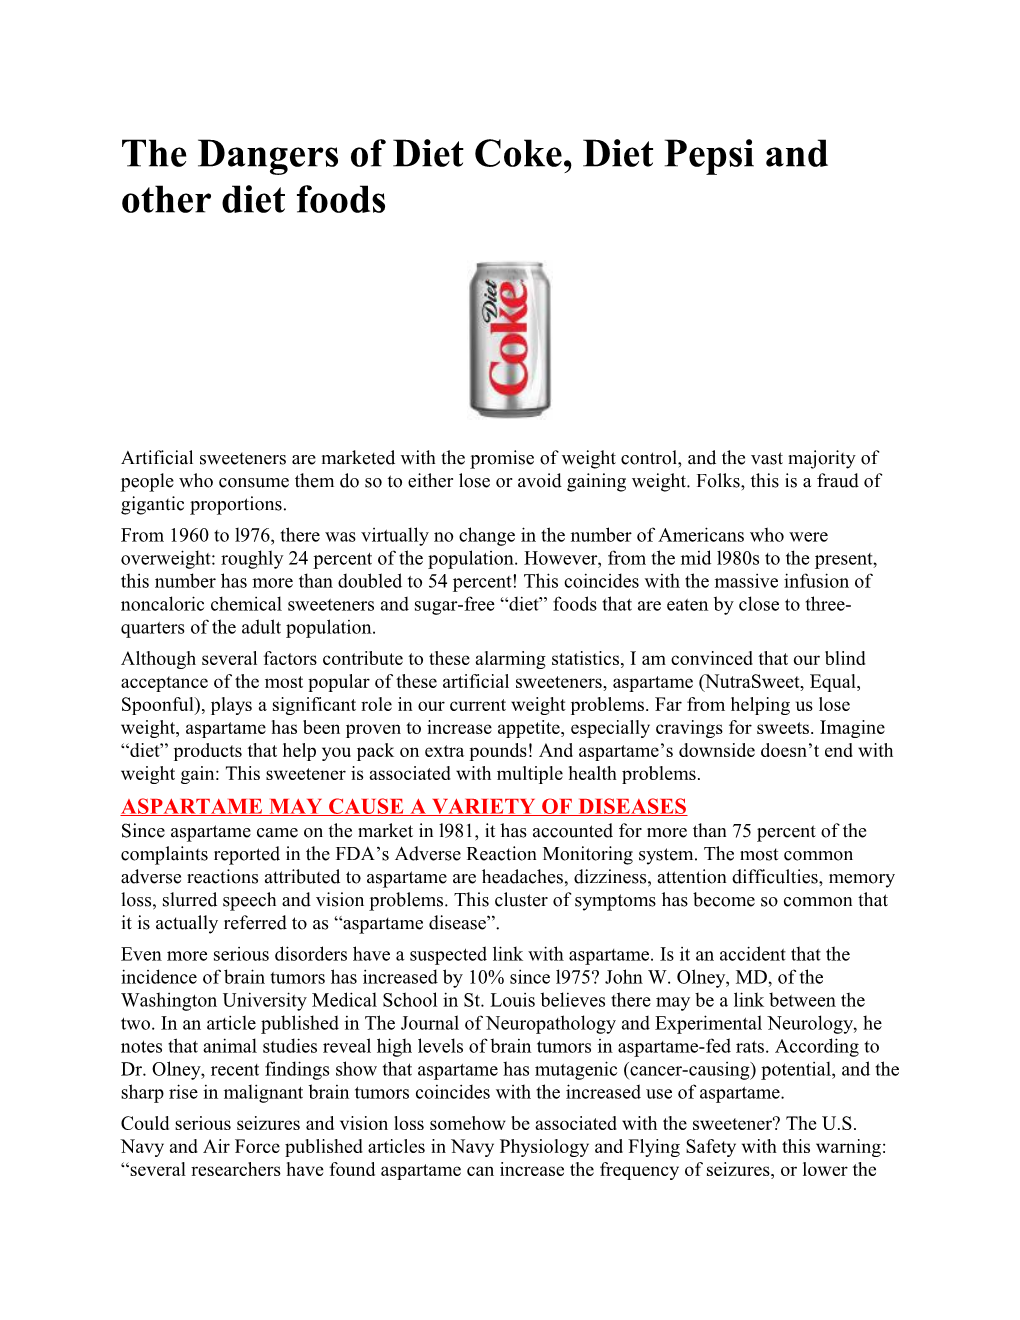 The Dangers of Diet Coke, Diet Pepsi and Other Dietfoods